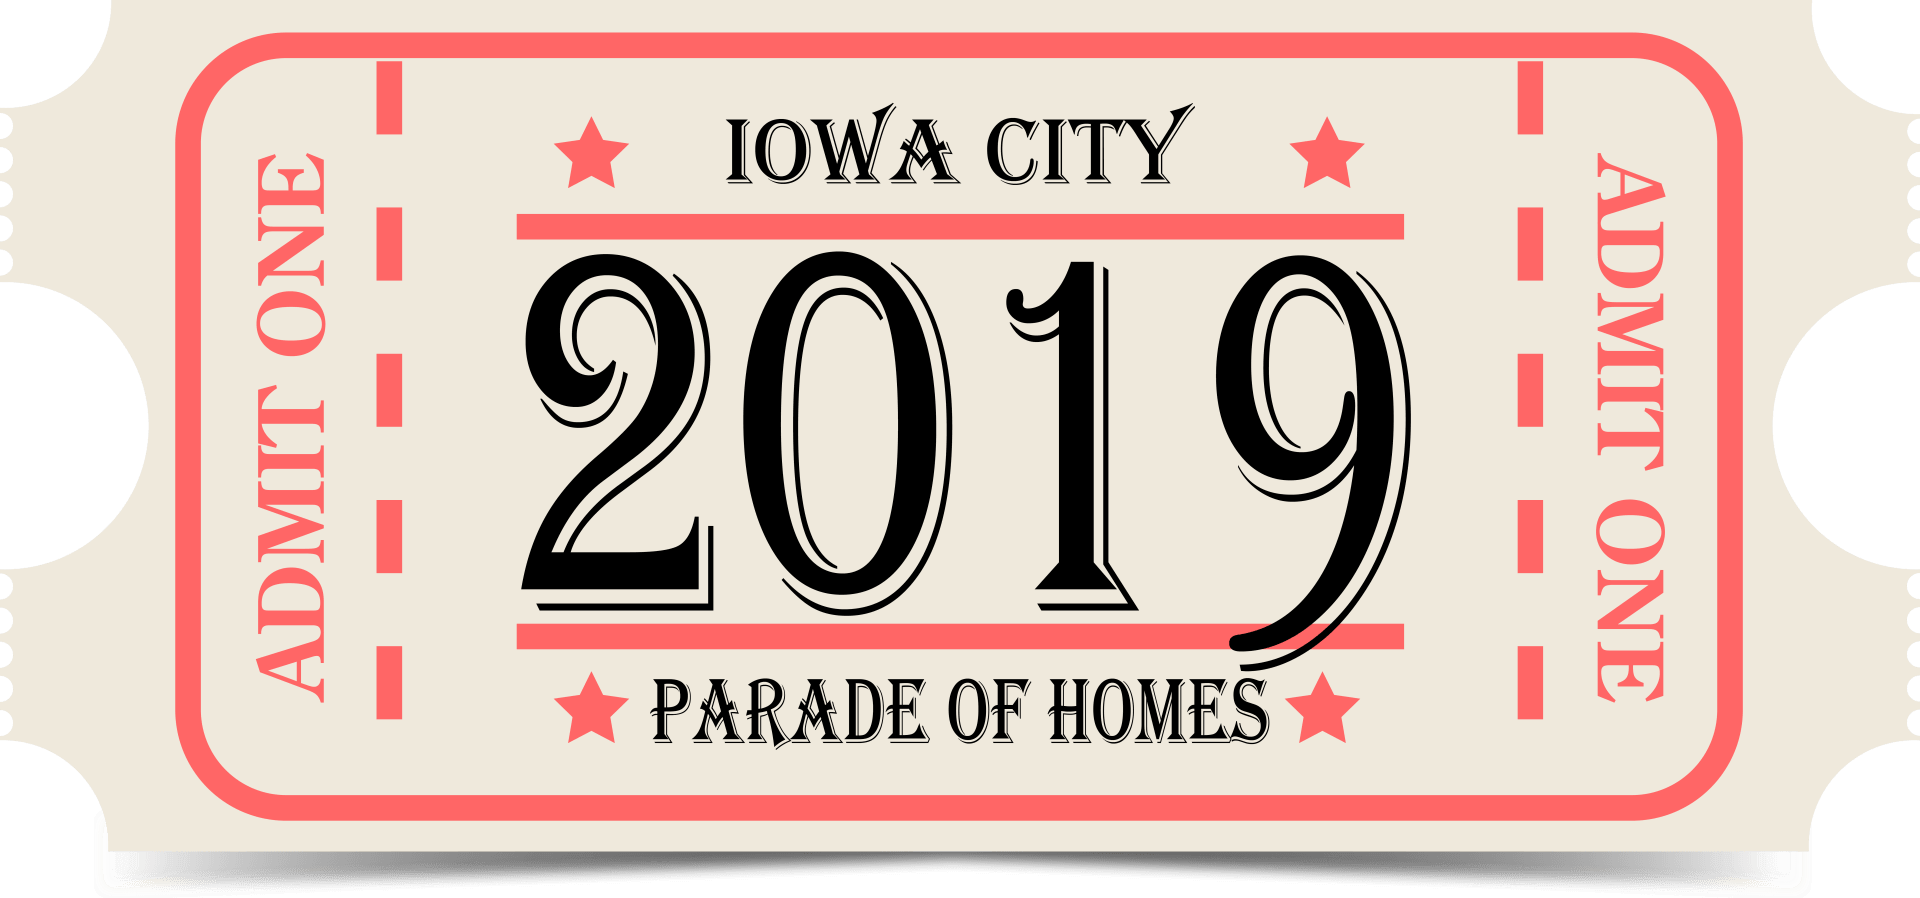 Parade Of Homes Ticket